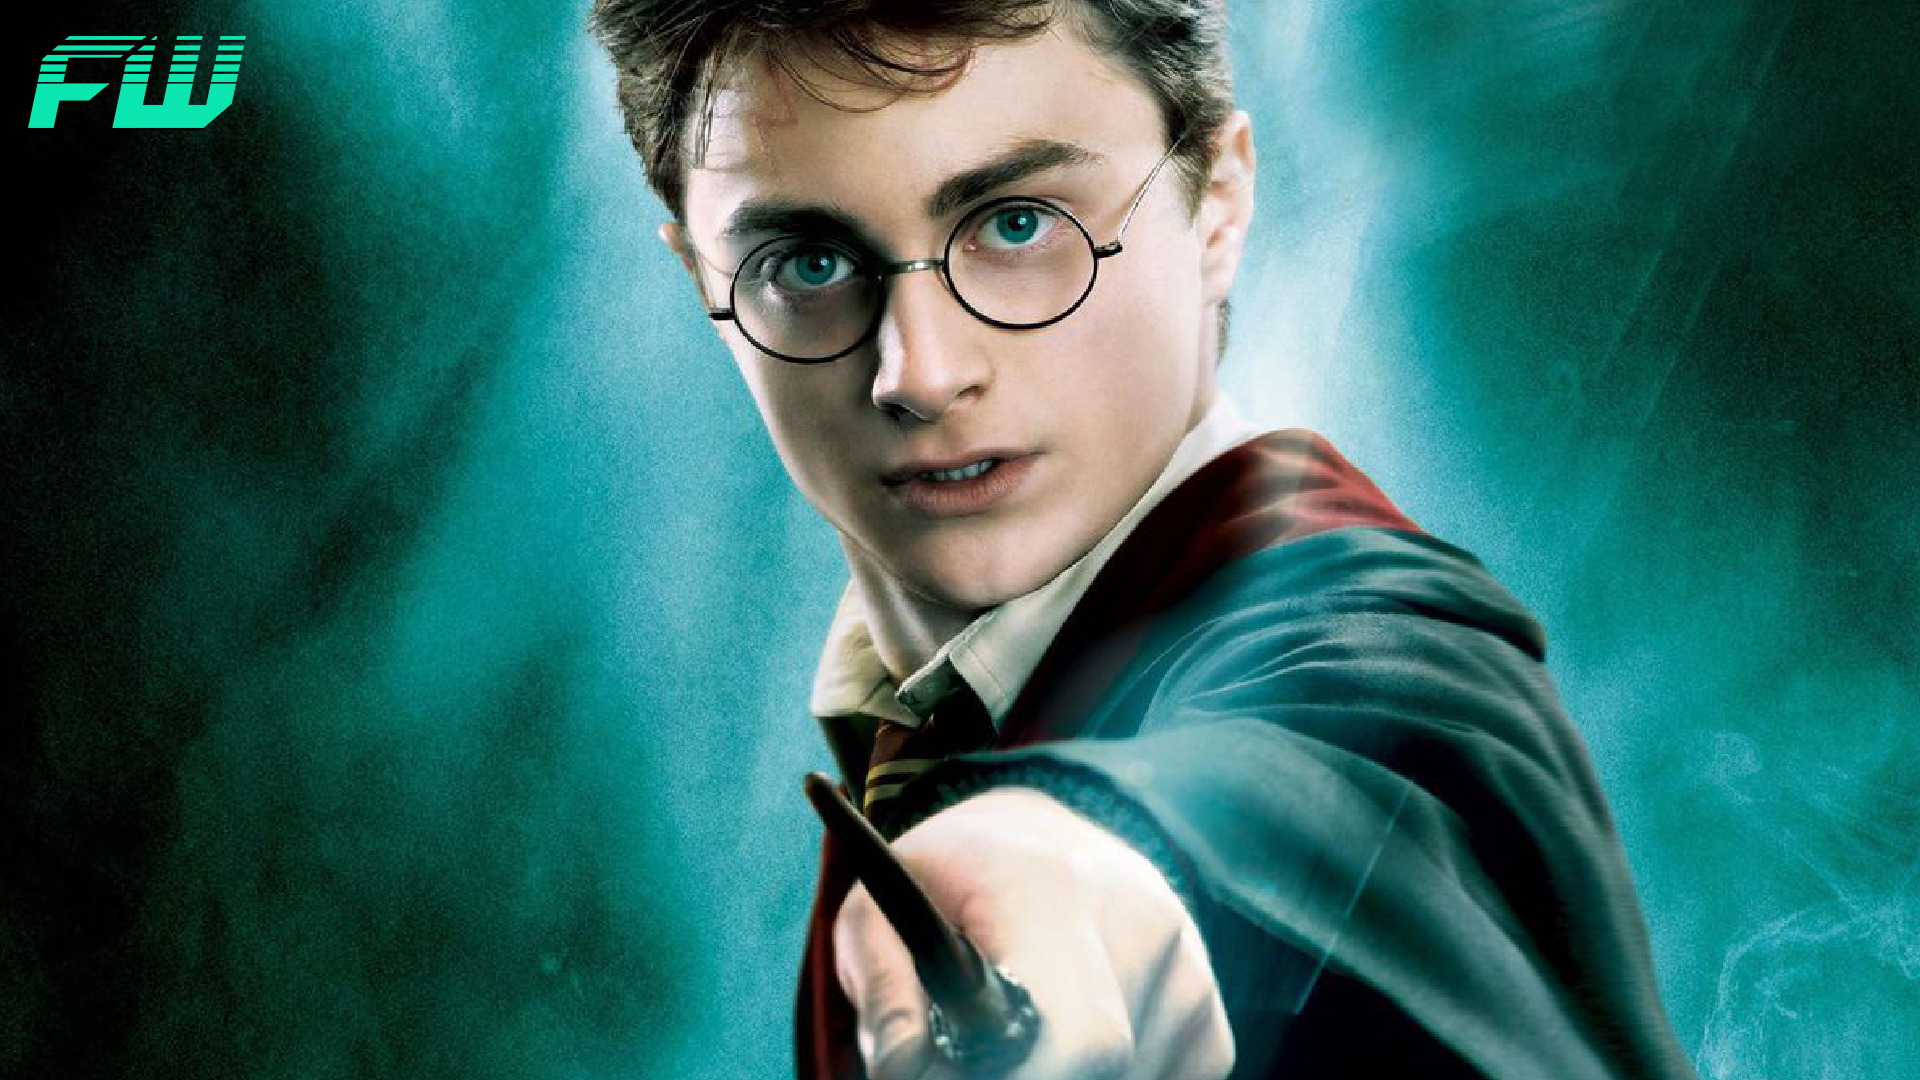 HBO Max Developing 'Harry Potter' Series Project